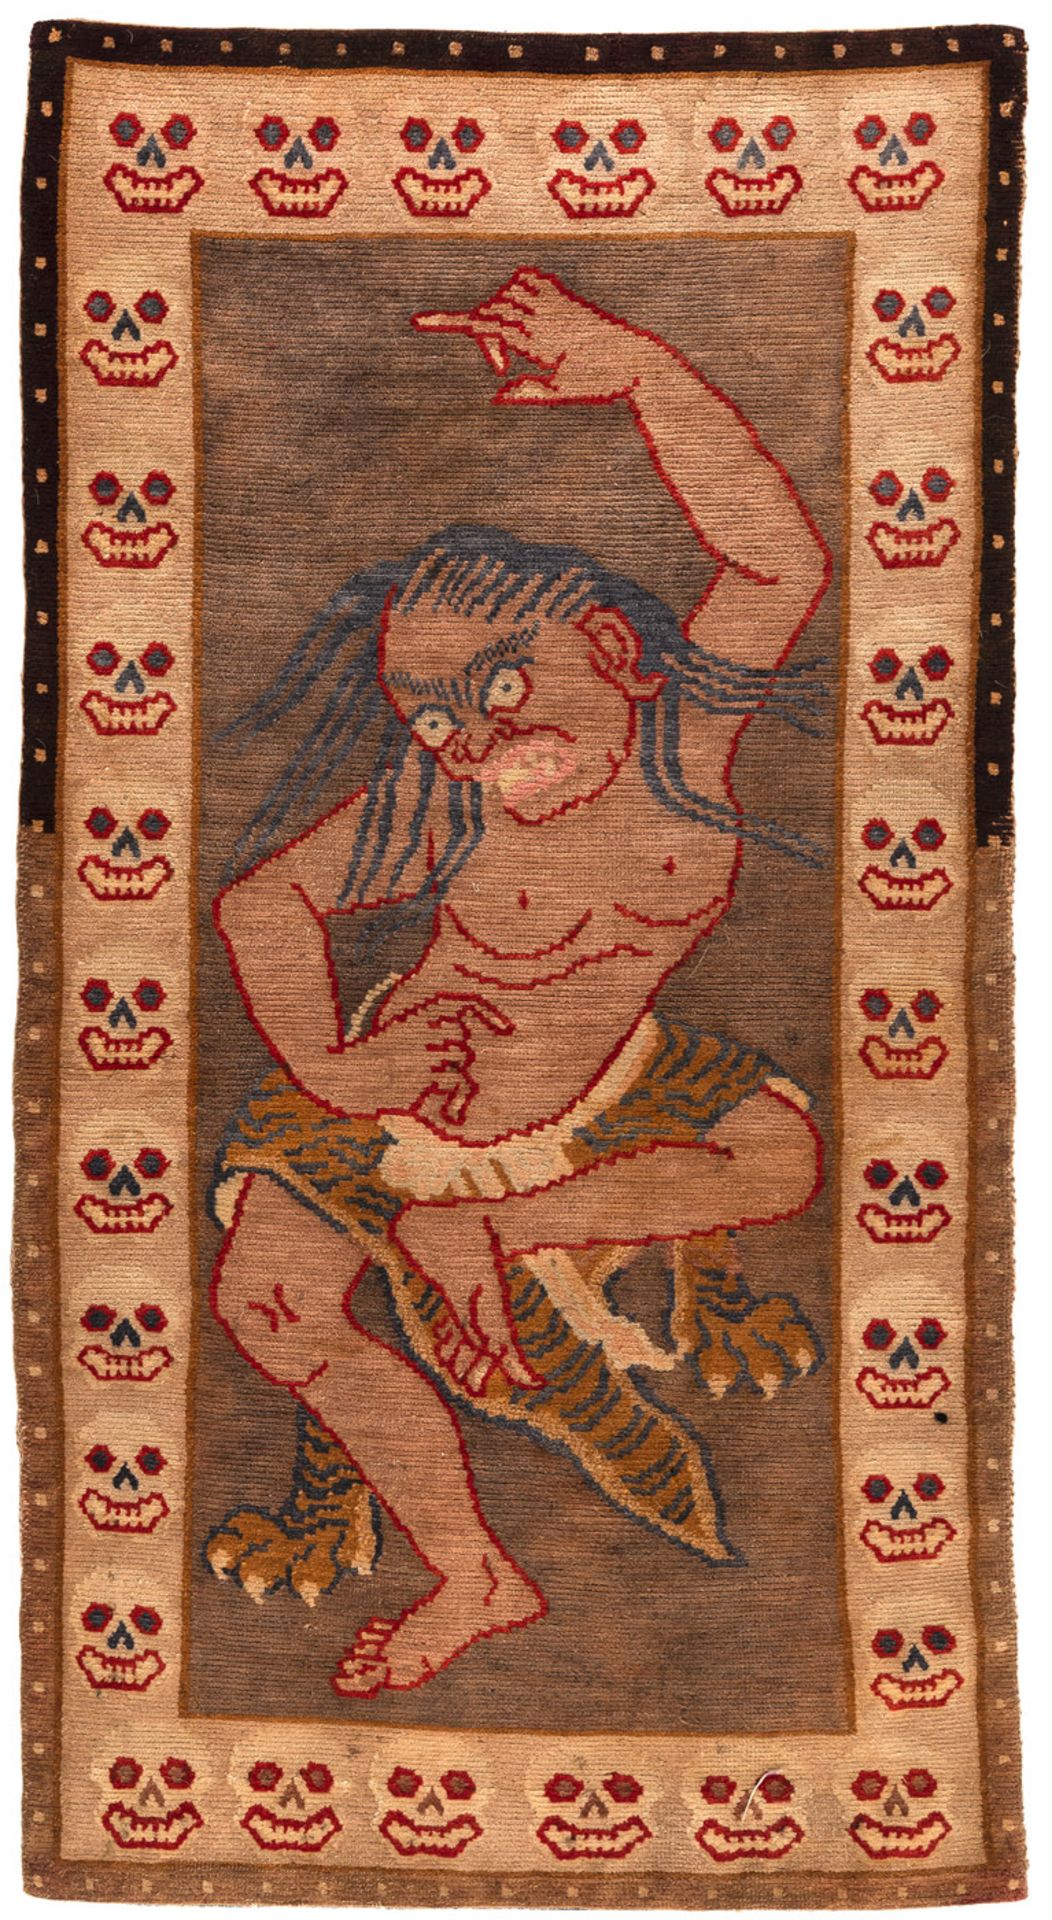 A 'Tantric' rug with a dancing demon